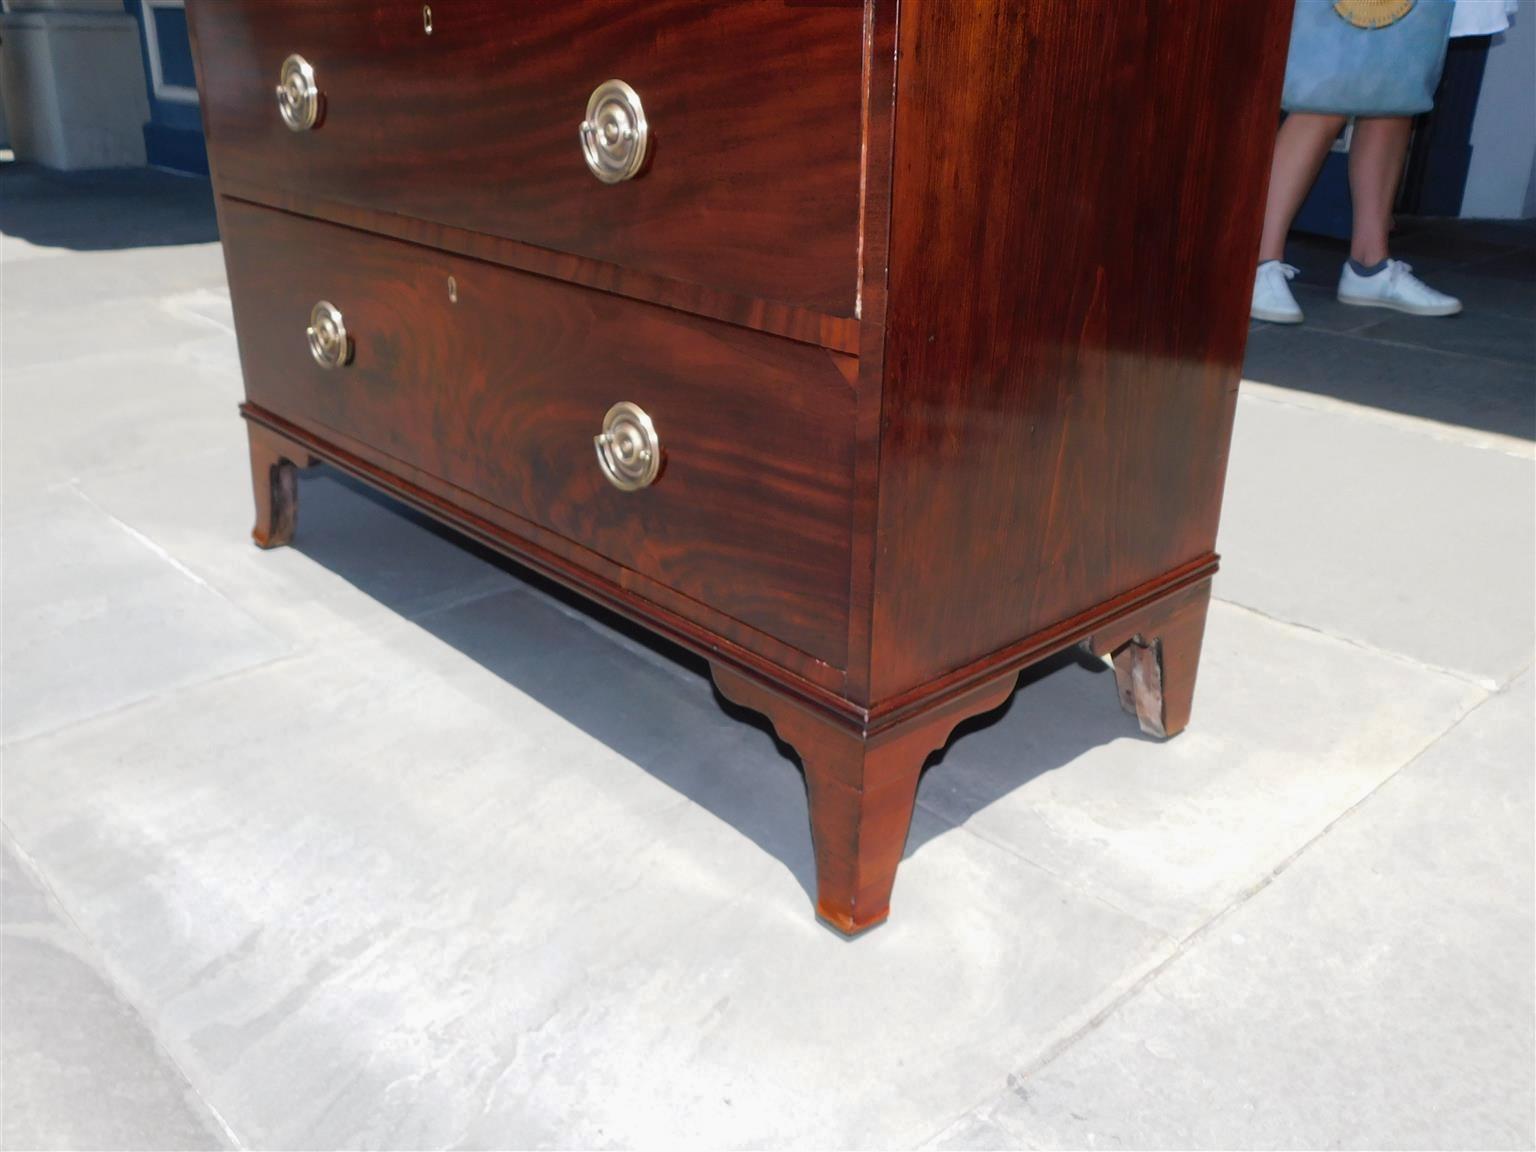 Brass American Hepplewhite Mahogany Reeded Chest of Drawers with Splayed Feet, C. 1790 For Sale